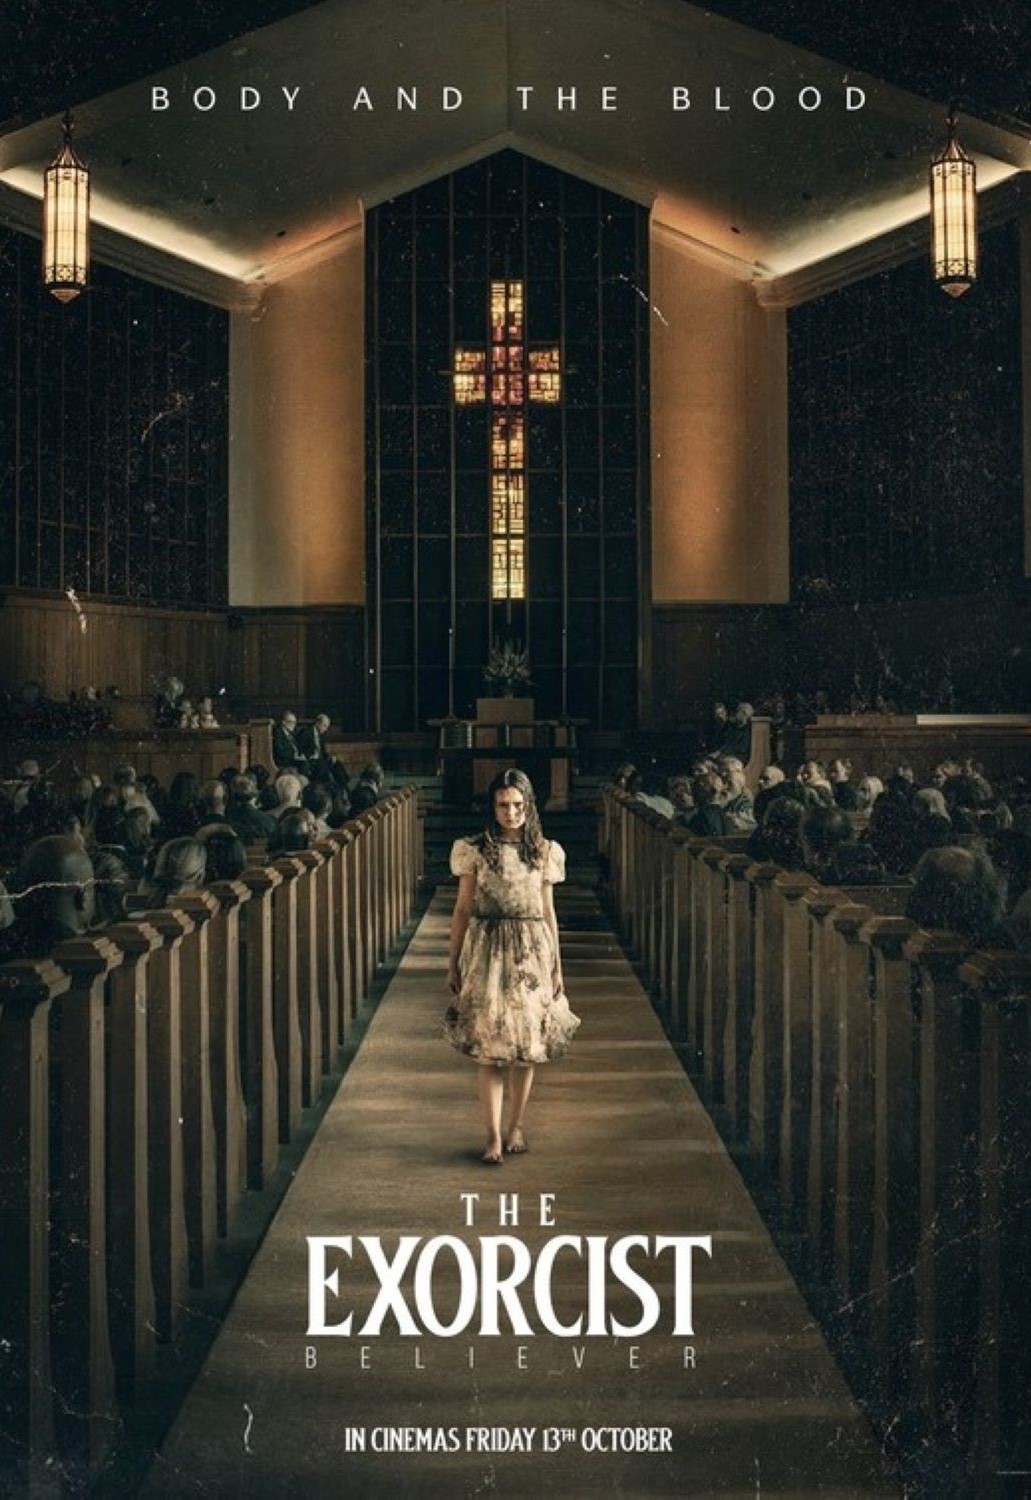 THE EXORCIST: Believer